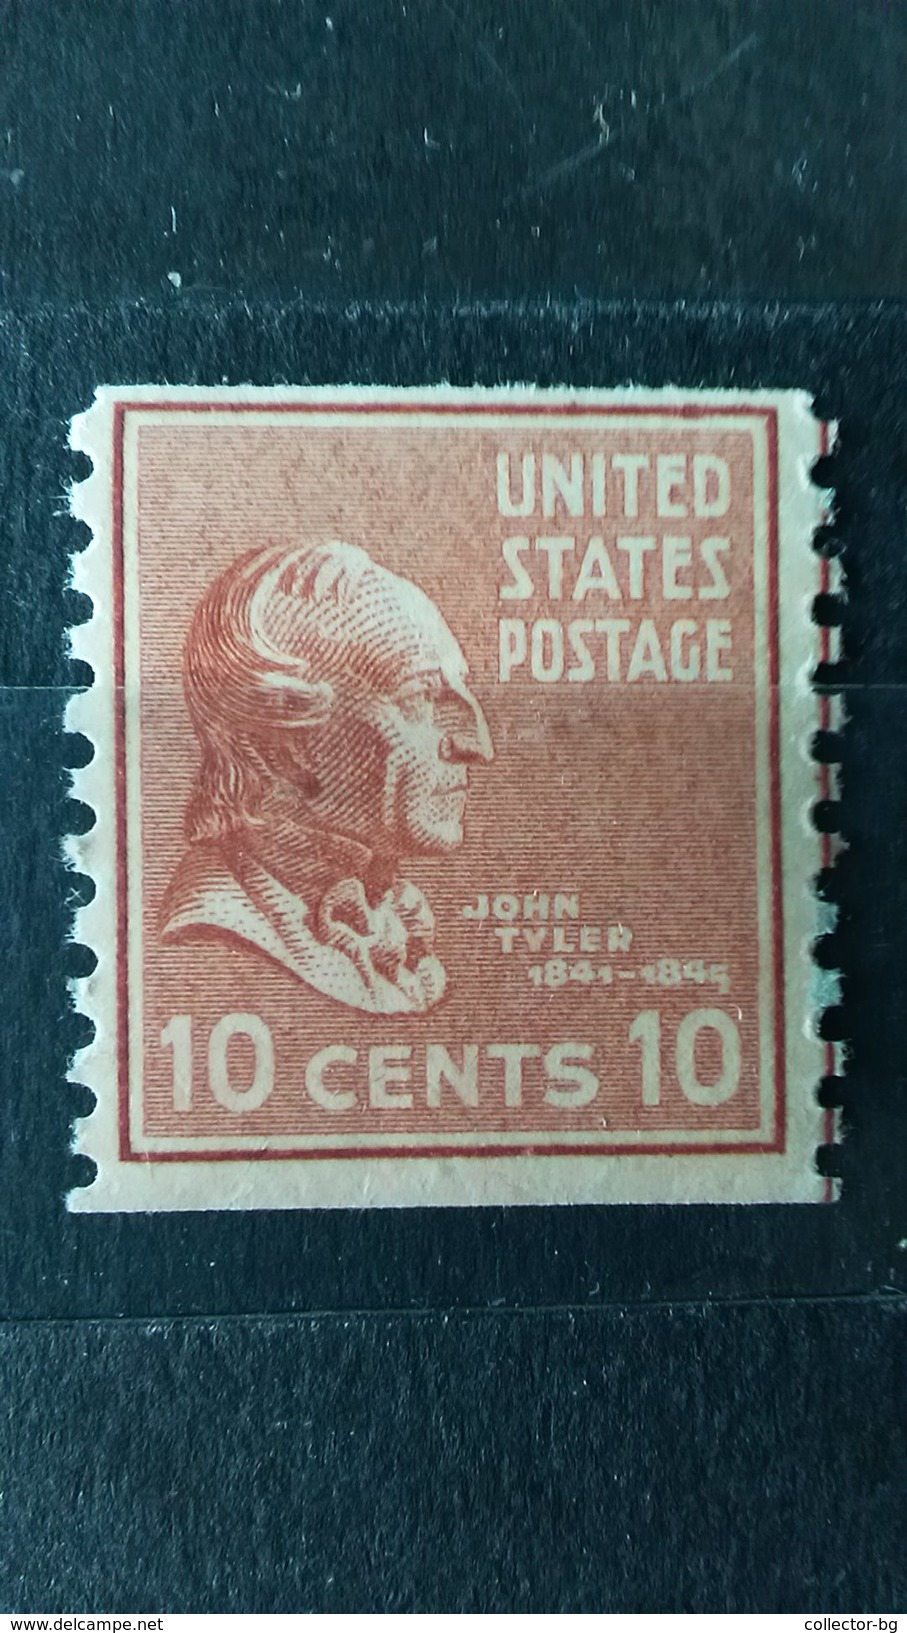 RARE 10 CENTS US POSTAGE FRESH COLOR USA TYLER VINTAGE UNUSED ERROR RED LINE PERFORATED SUPERB STAMP TIMBRE - Unused Stamps